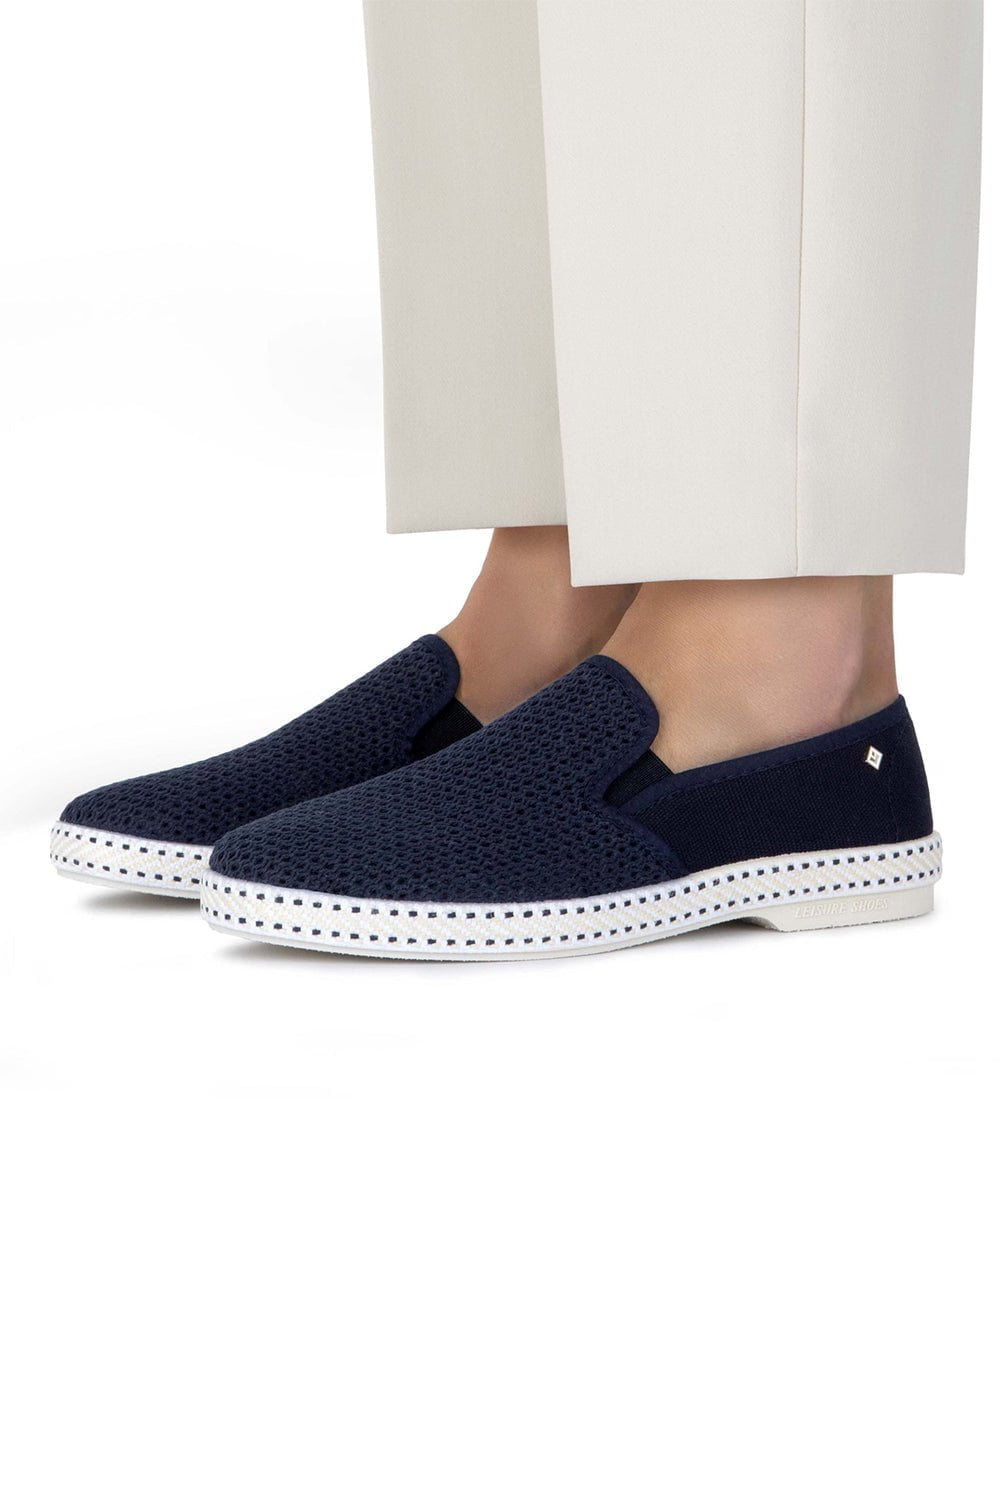 Classic Canvas & Mesh Navy Slip On Loafer – Marissa Collections